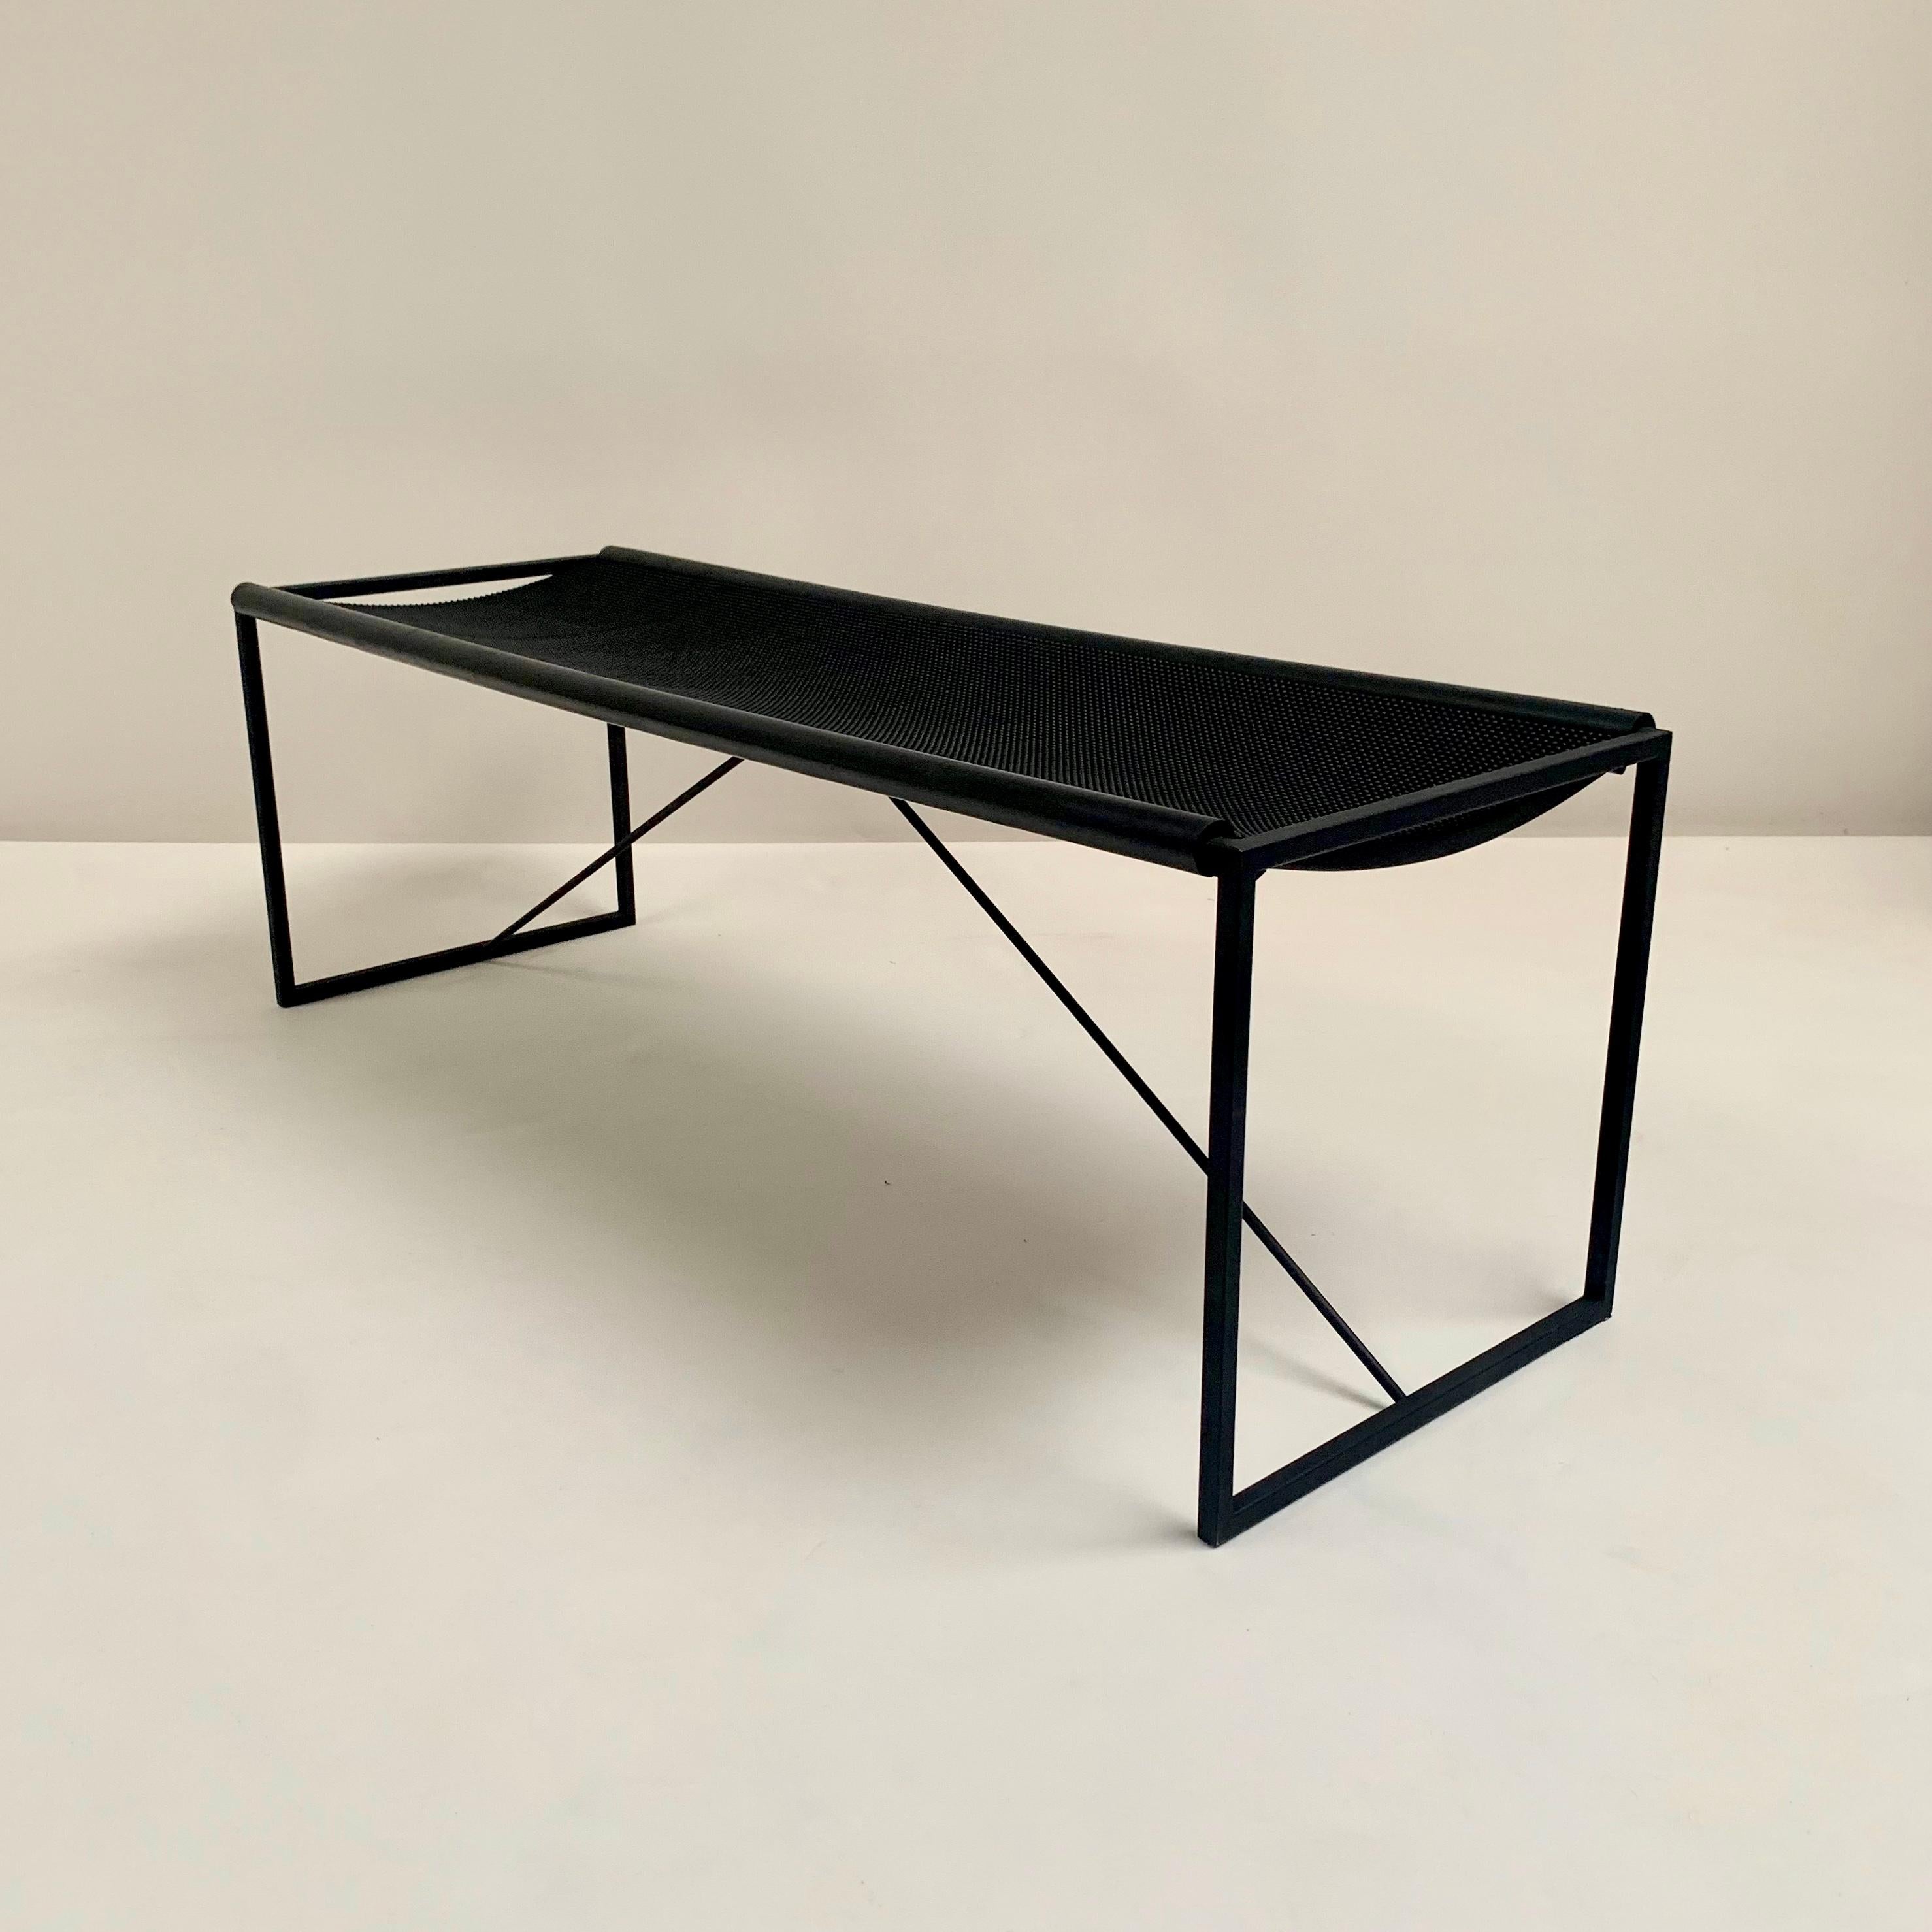 Rare Maurizio Peregalli Panca bench for Zeus, circa 1980, Italy.
Black steel square tube frame,  flexible seat in black thousand points rubber held on the long sides by extruded rubber sleeves.
Good original condition.
Dimensions: 120 cm W, 42 cm D,